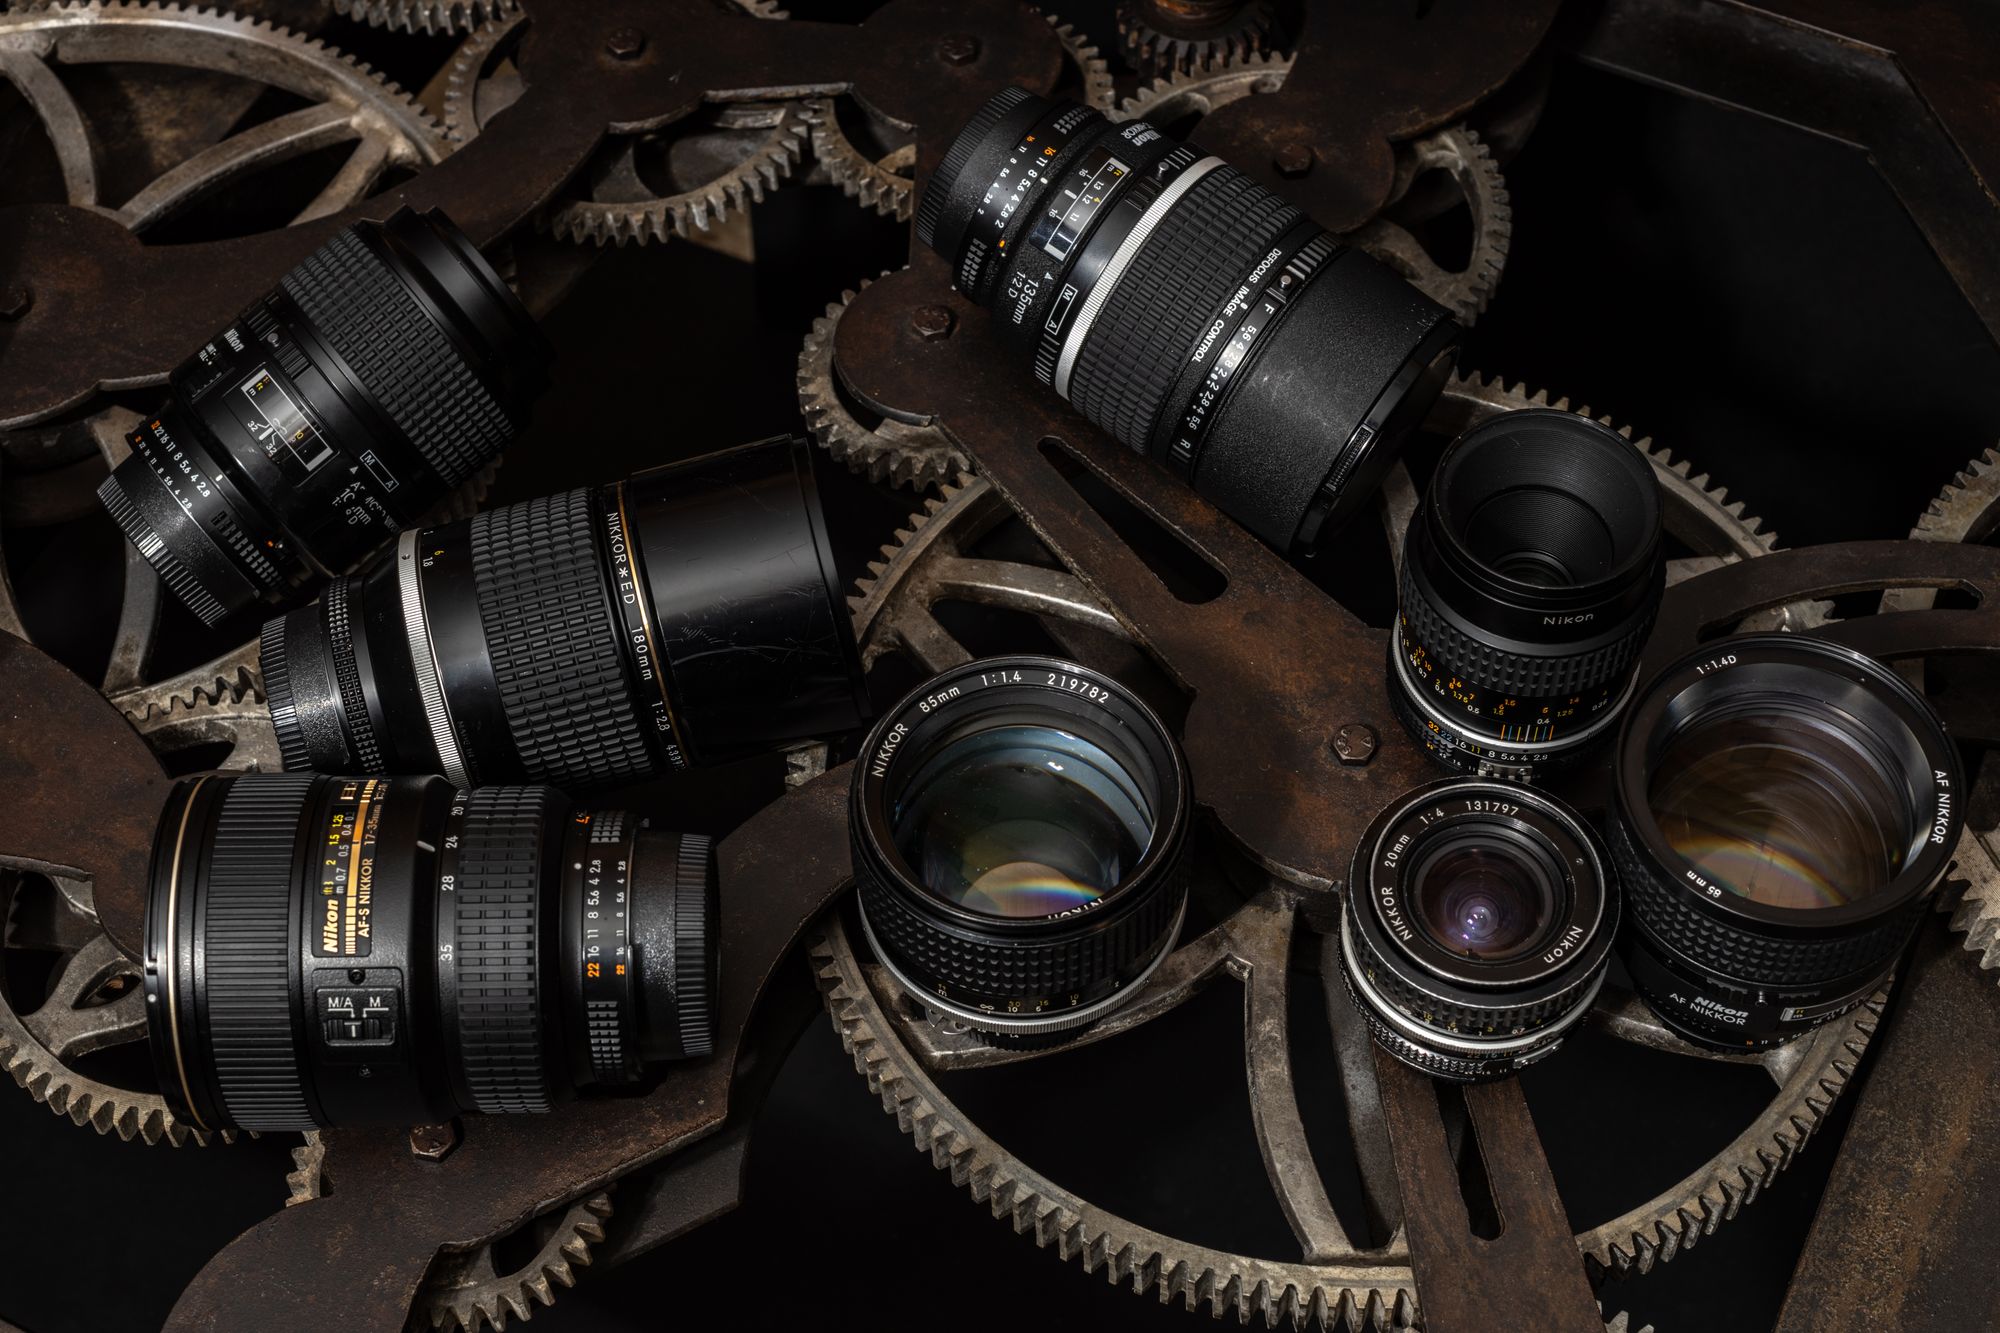 Back to the Basics: My Experiences With the Nikkor 50mm F/1.4 AI-s